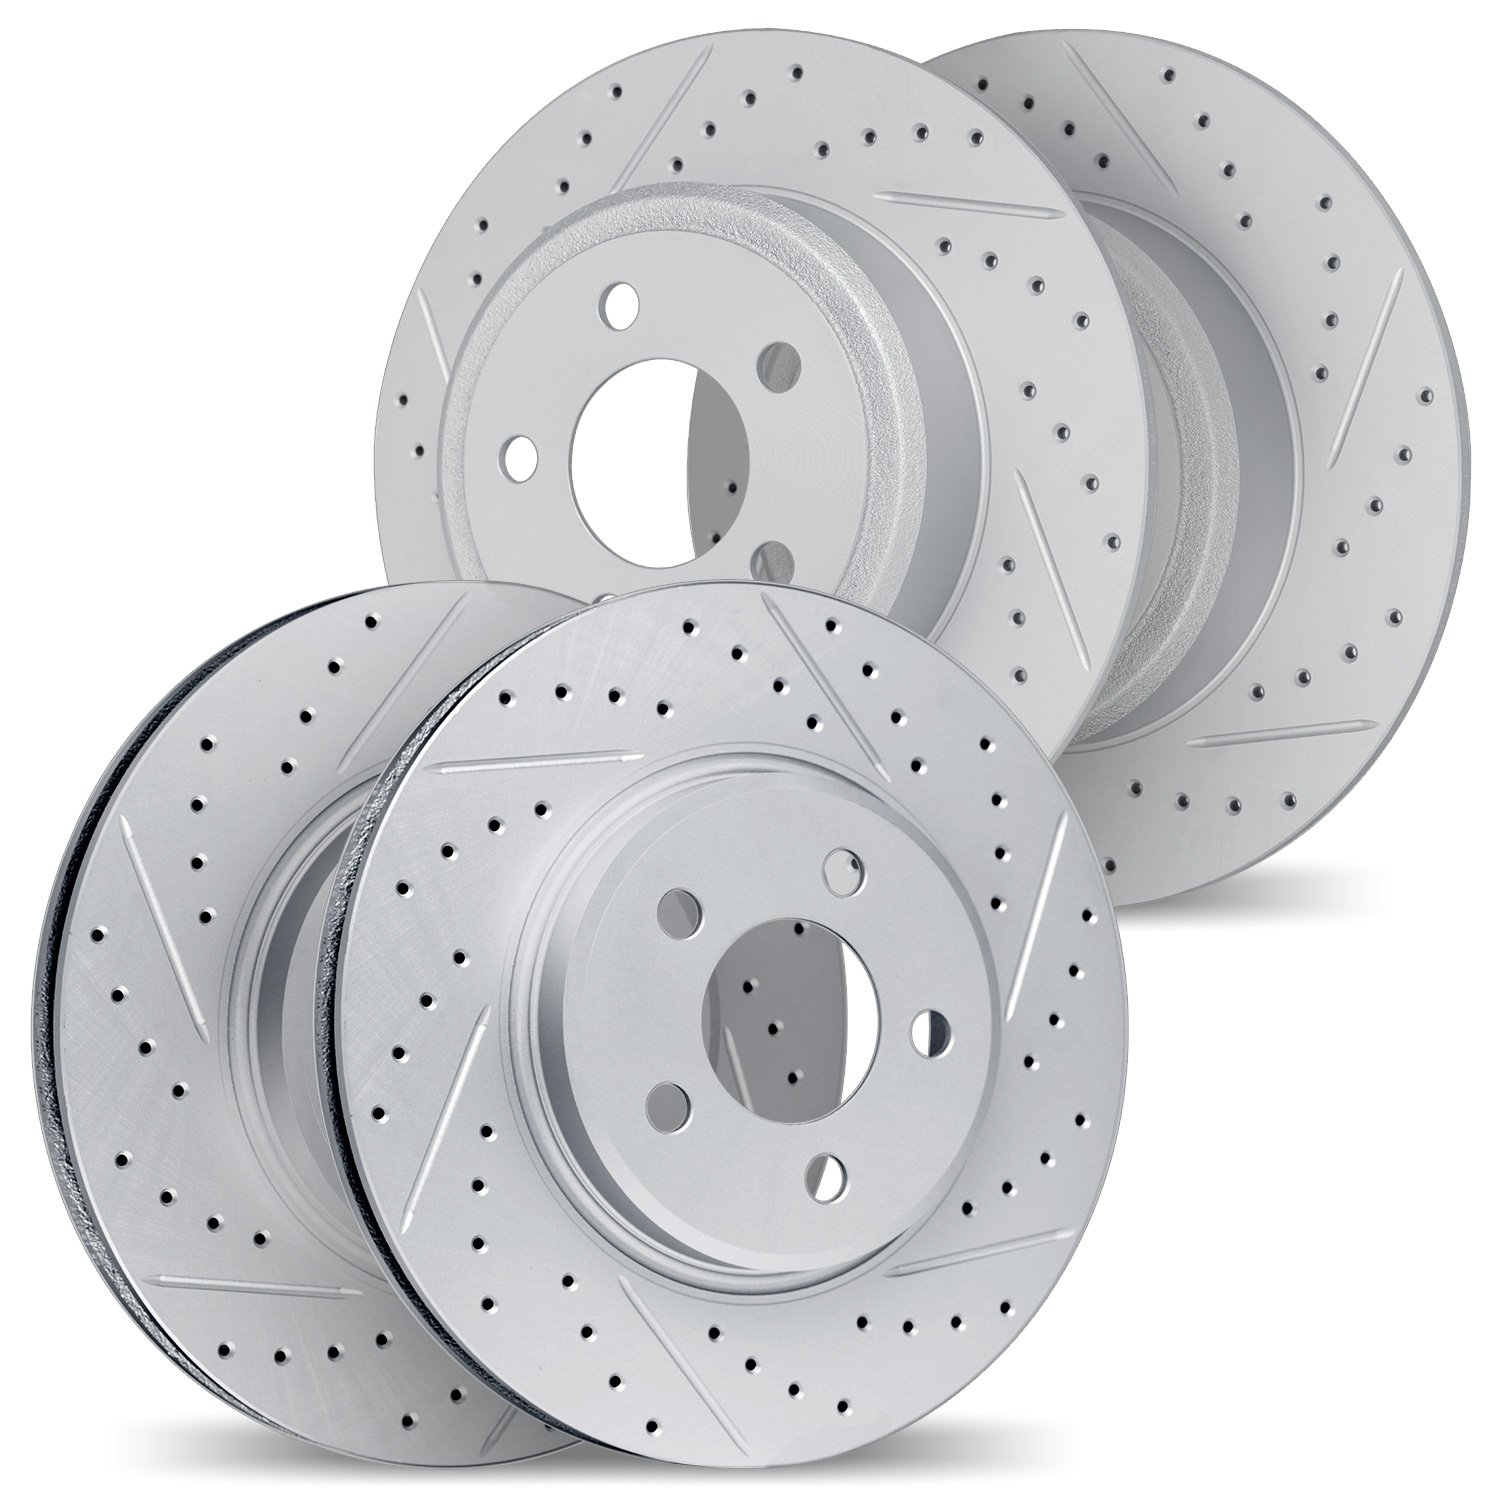 2004-59045 Geoperformance Drilled/Slotted Brake Rotors, 2017-2021 Acura/Honda, Position: Front and Rear